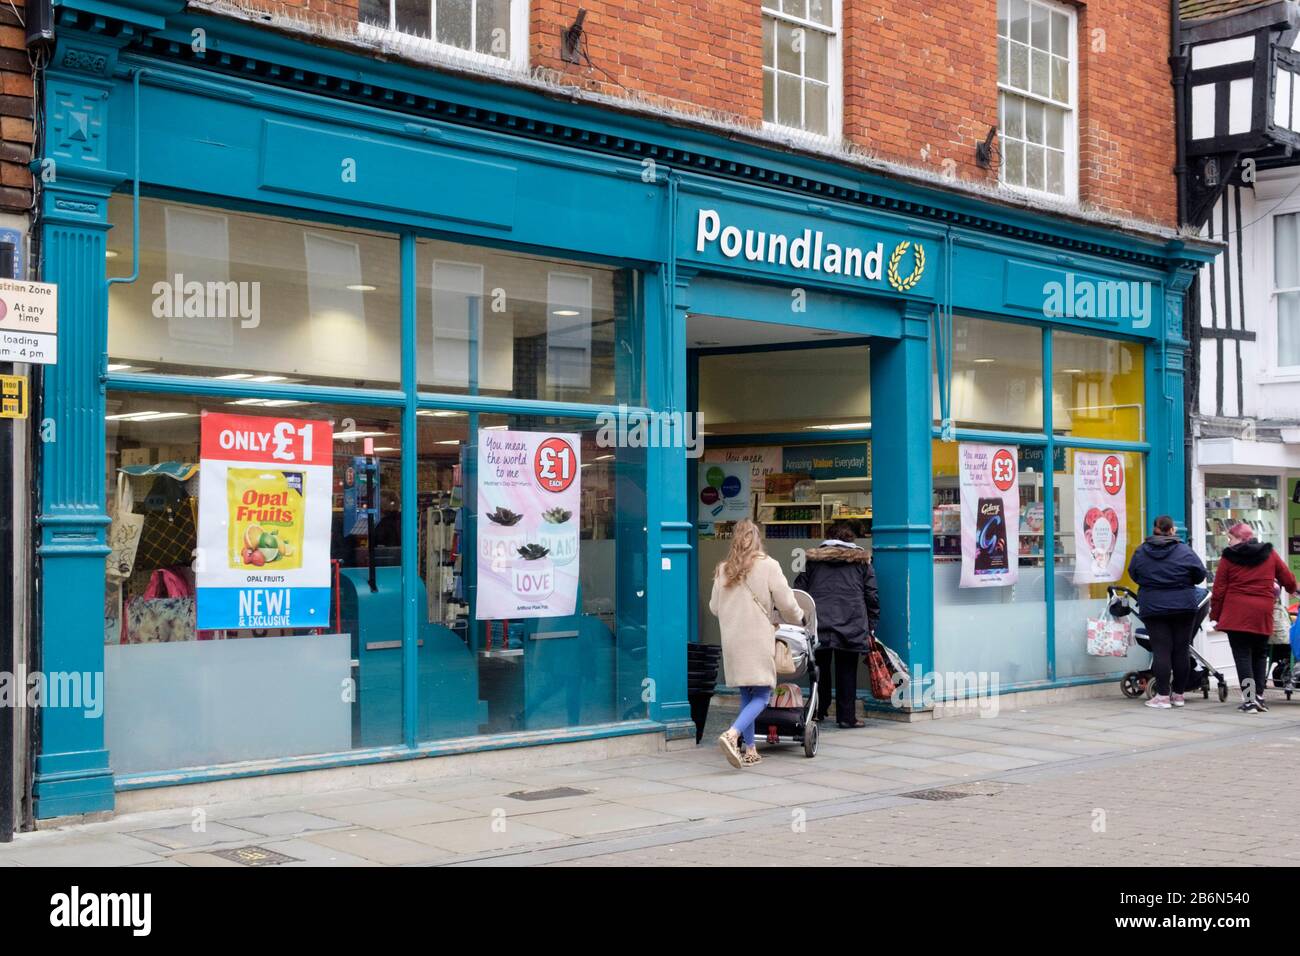 A branch of the retail chain Poundland in Salisbury wiltshire UK Stock Photo